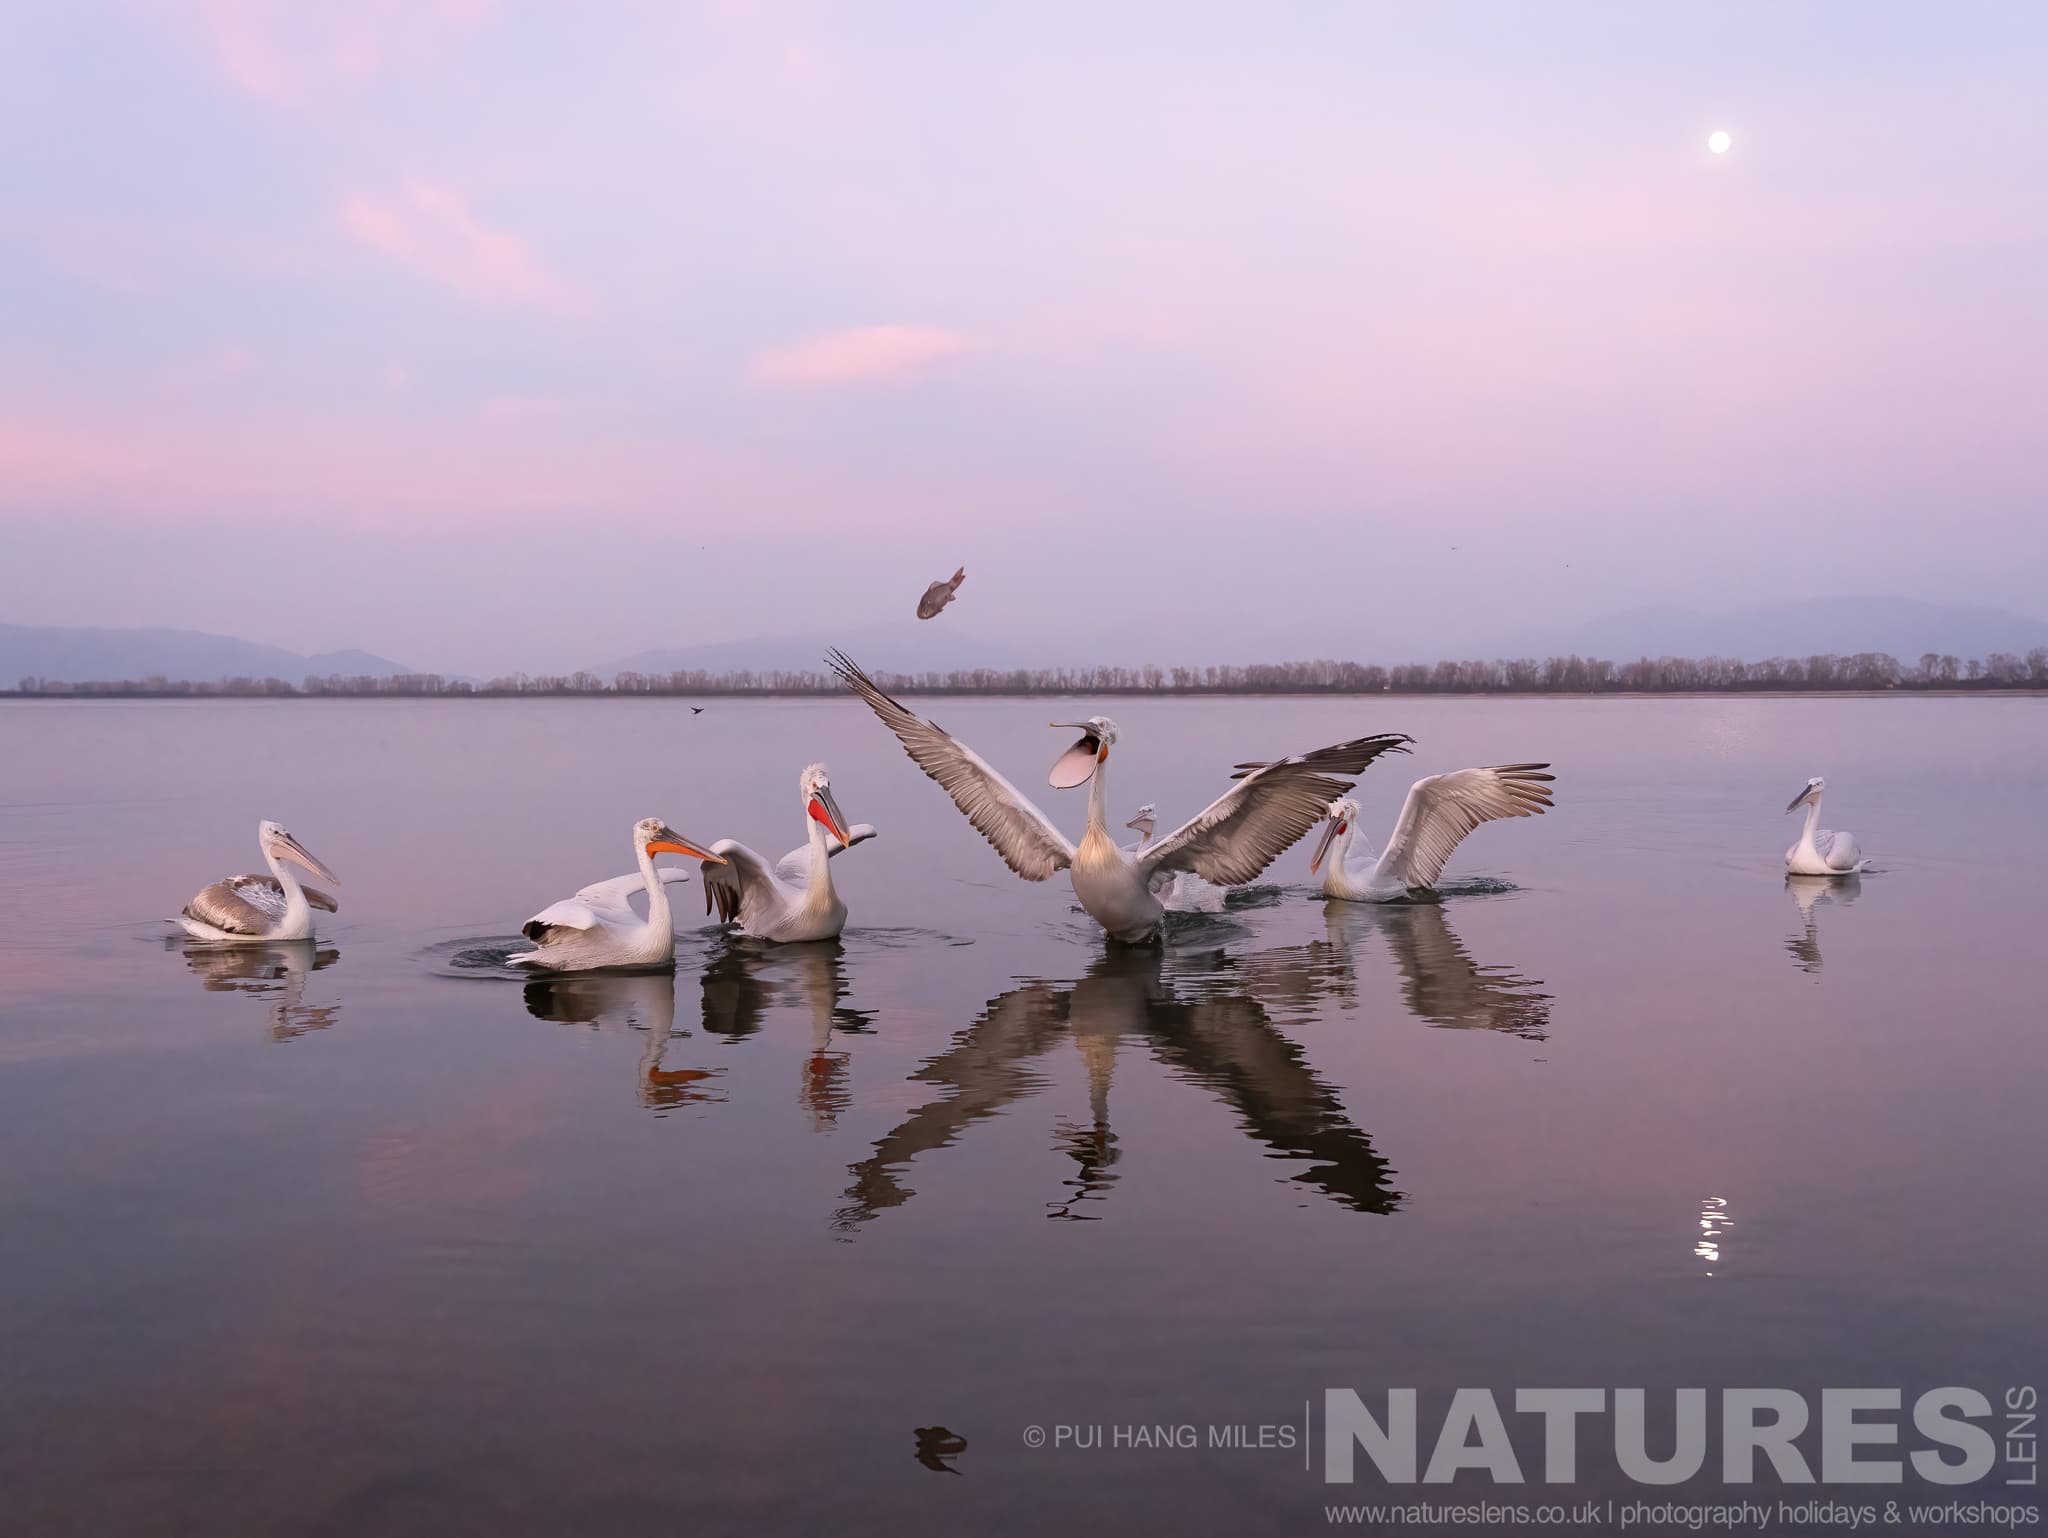 A group of the Dalmatian Pelicans of Greece at the shoreline of Lake Kerkini